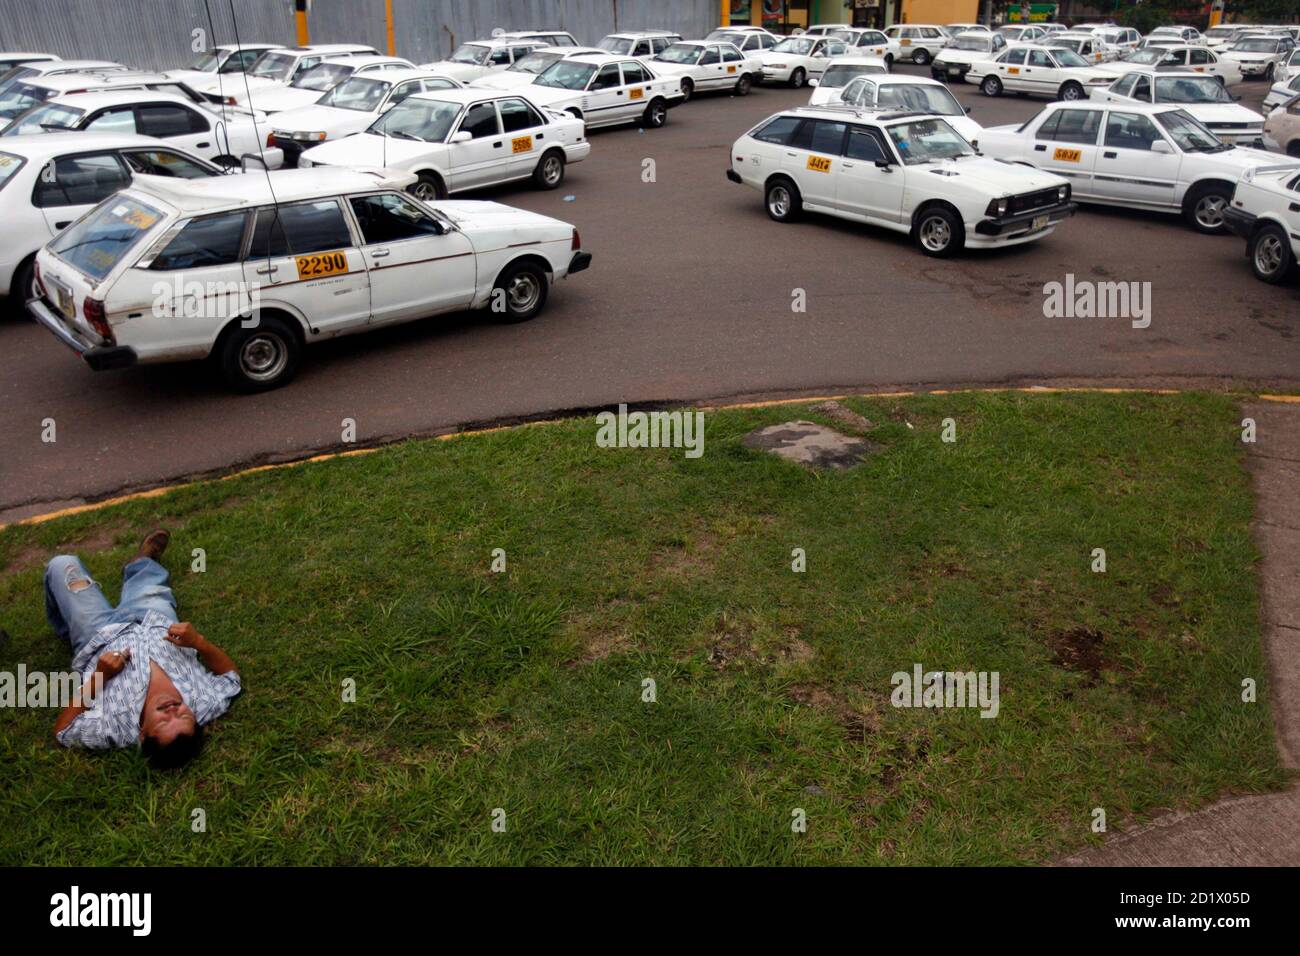 Taxis remain idle during a strike by taxi drivers in Tegucigalpa July 5, 2010. The taxi drivers are demanding the government of President Porfirio Lobo pay the $370 bonus that had already been approved by the goverment of ousted former President Manual Zelaya to offset rising fuel prices, according to the Honduran Association of taxi drivers (ATAXISH). REUTERS/Edgard Garrido (HONDURAS - Tags: TRANSPORT CIVIL UNREST POLITICS BUSINESS) Stock Photo